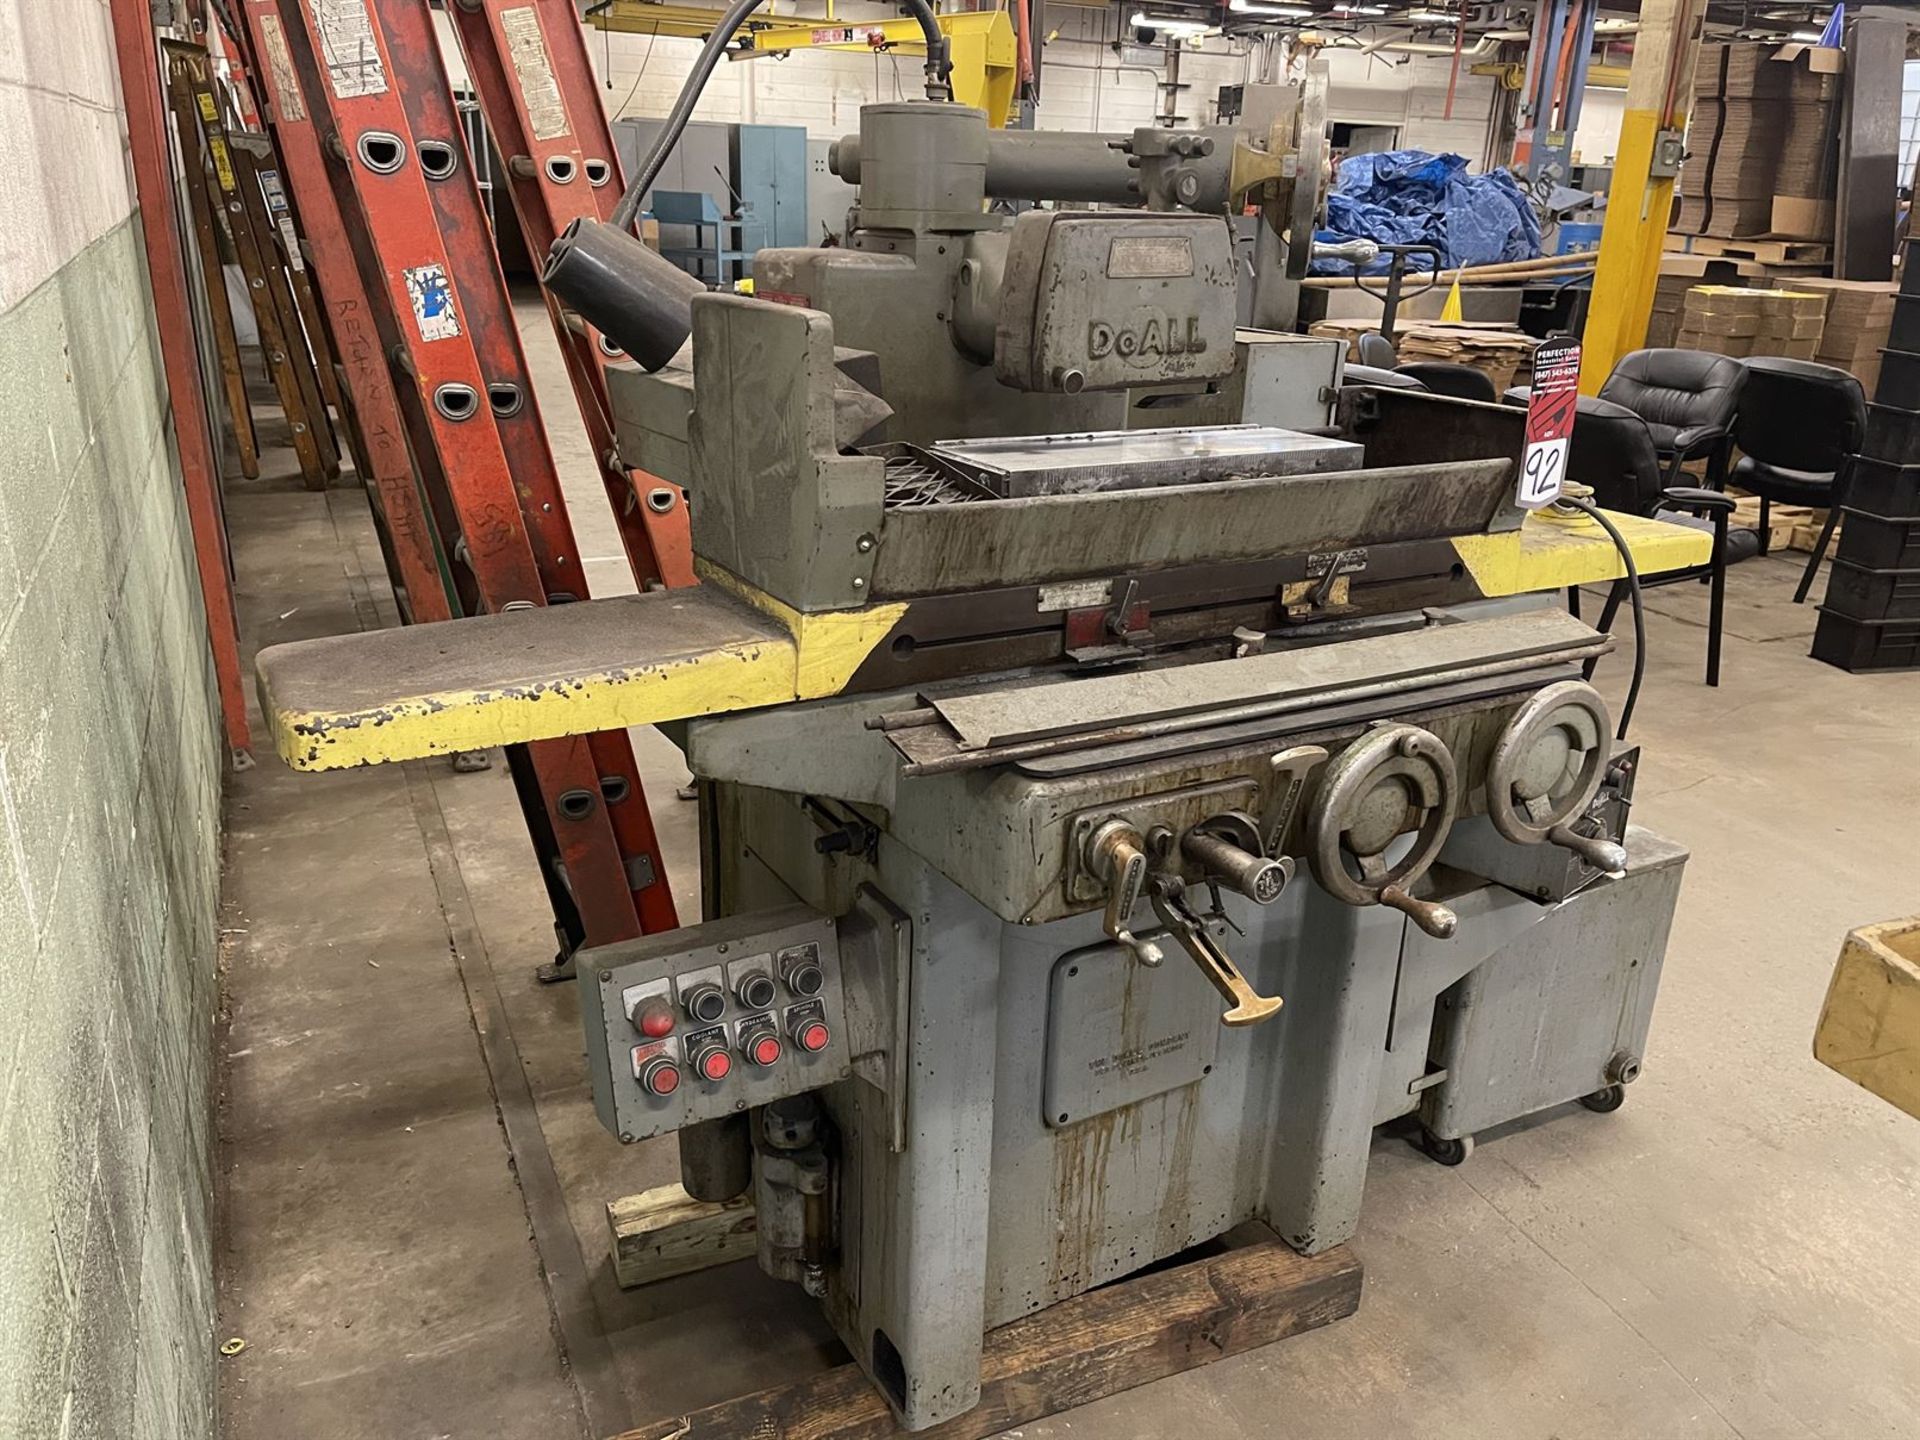 DOALL D618-7 Surface Grinder, s/n 219-75709, 6" x 18" Magnetic Chuck, Power Feed, DoAll Selectron - Image 3 of 7